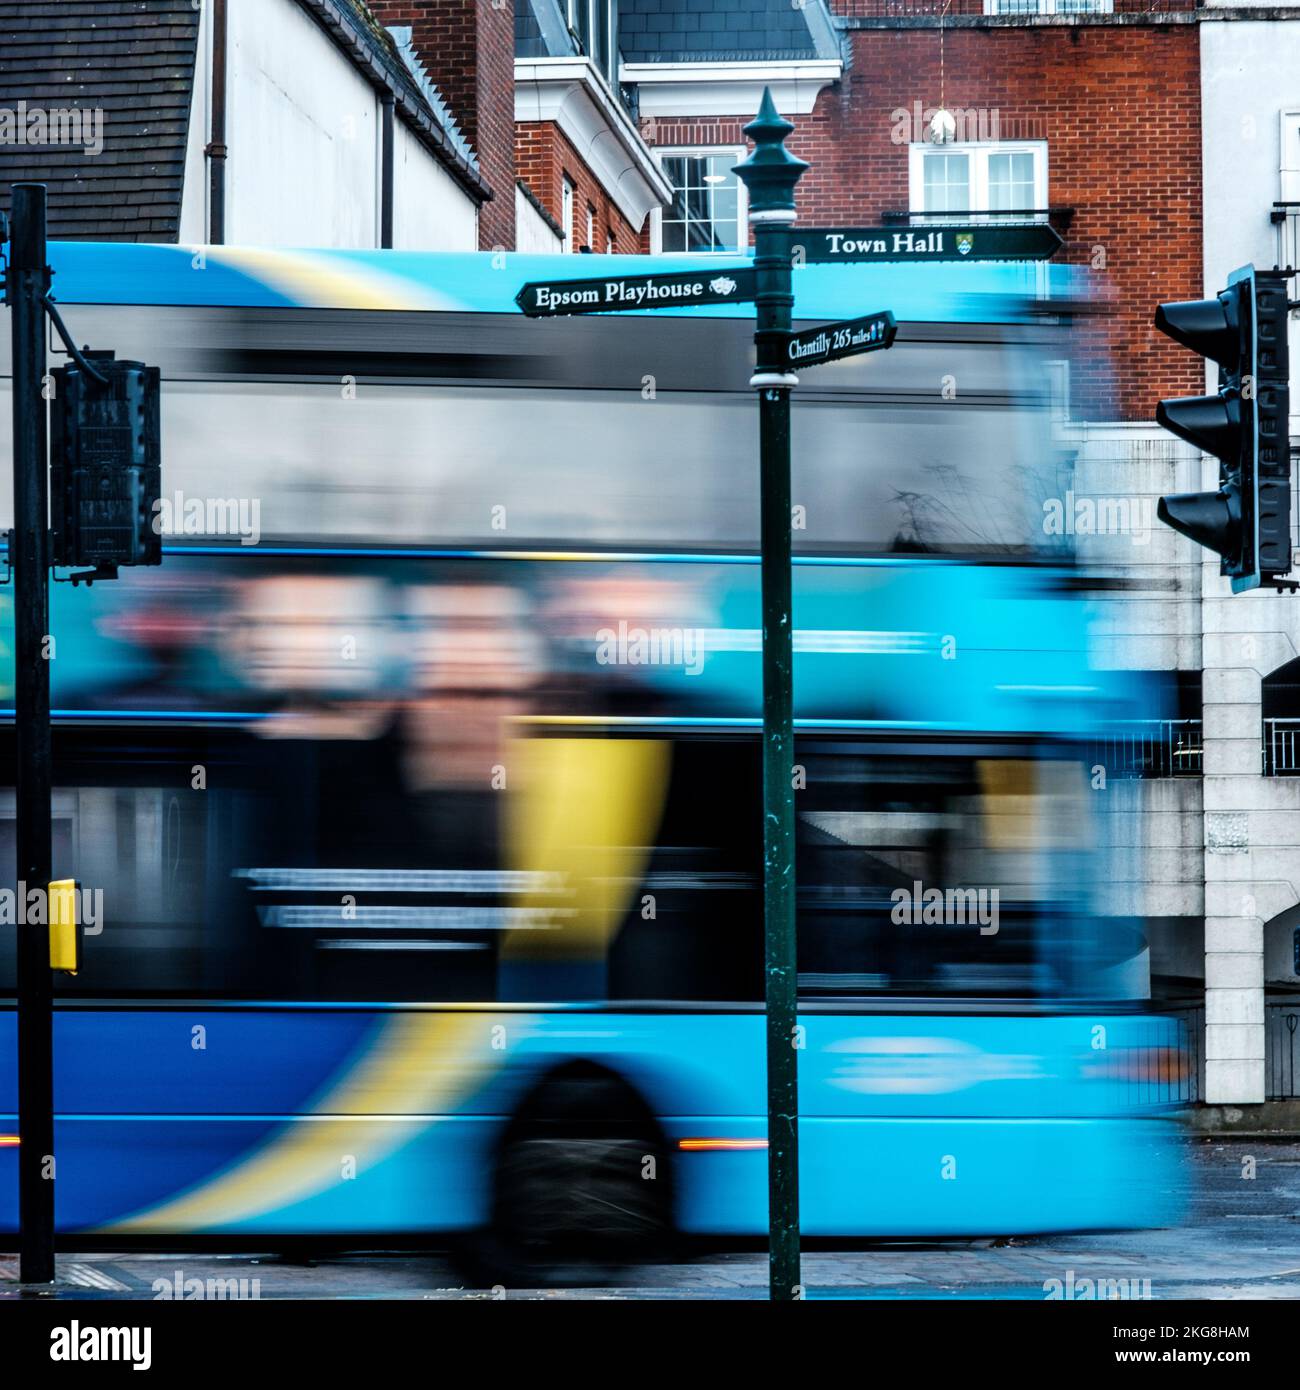 Epsom, Surrey, London UK, November 20 2022, Surrealistic Image Of A Public Transport Bus Passing Traffic Lights On A Main Road With blurred Motion Ind Stock Photo